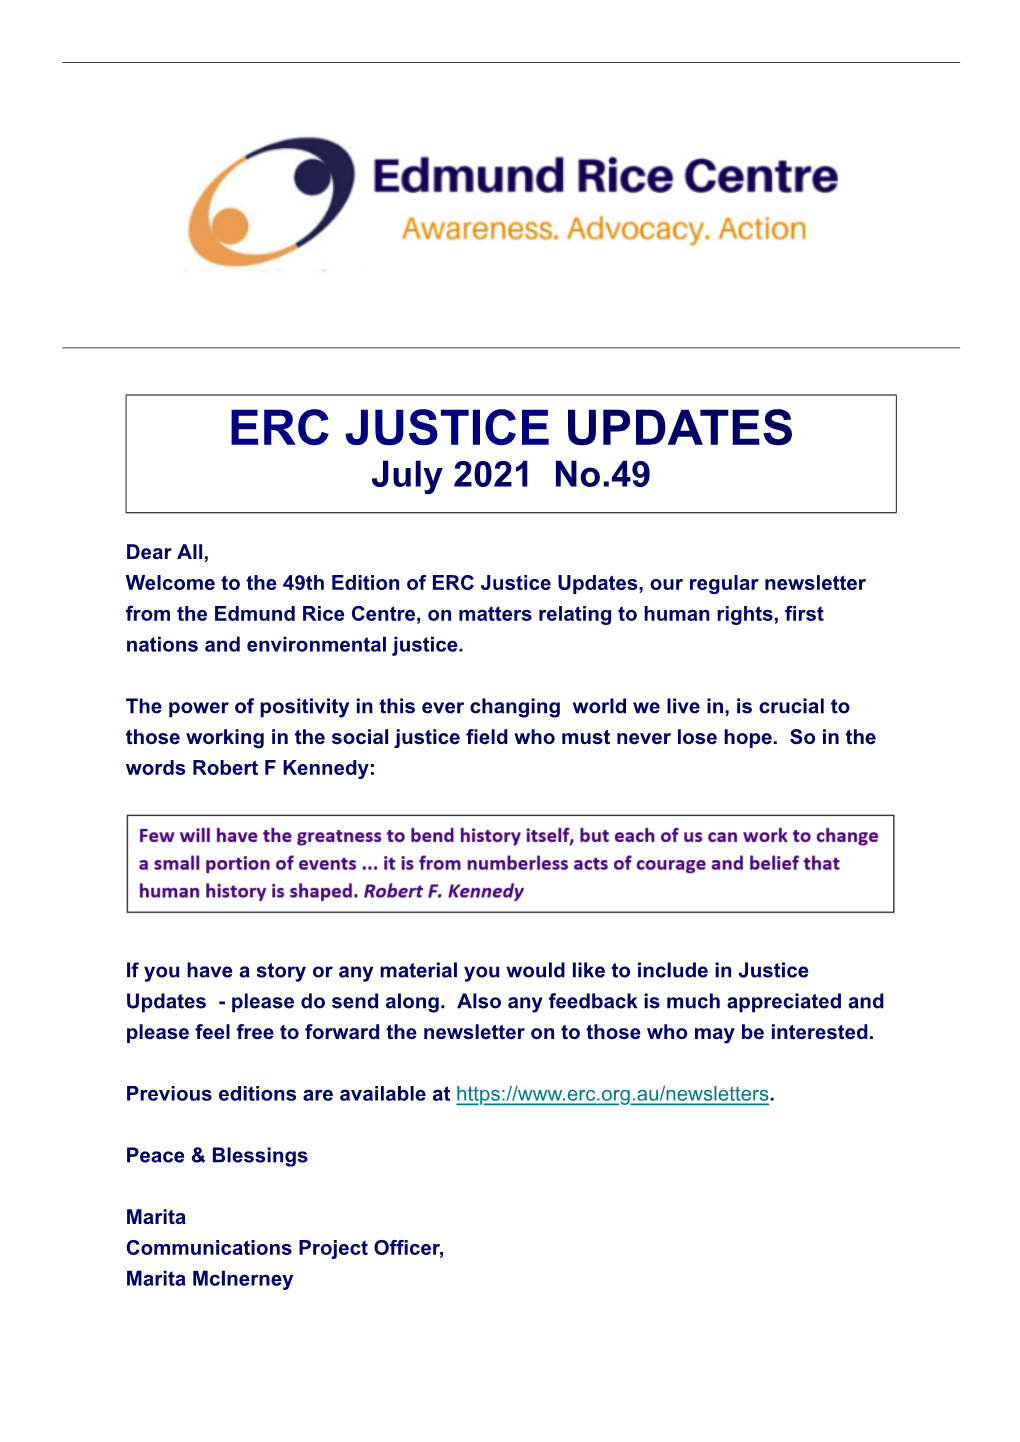 Dear All, Welcome to the 49Th Edition of ERC Justice Updates, Our Regular